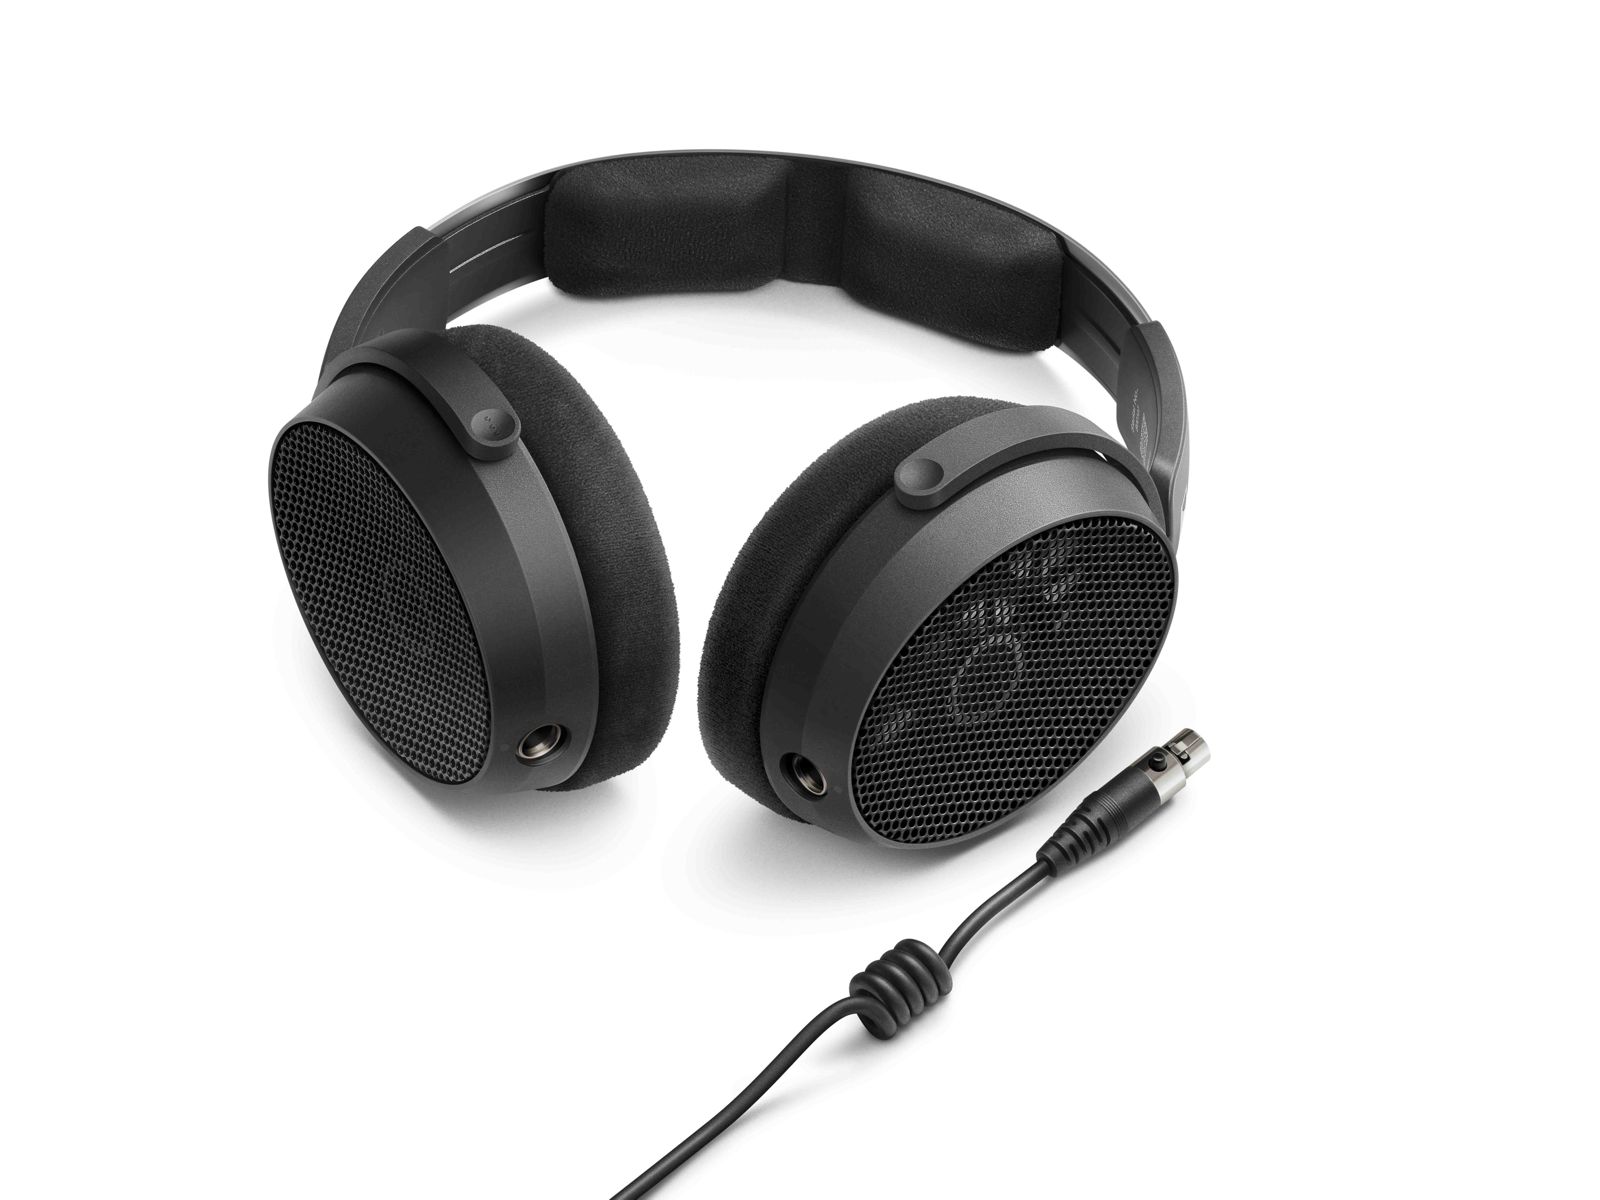 Sennheiser HD 490 Pro Price India and Availability